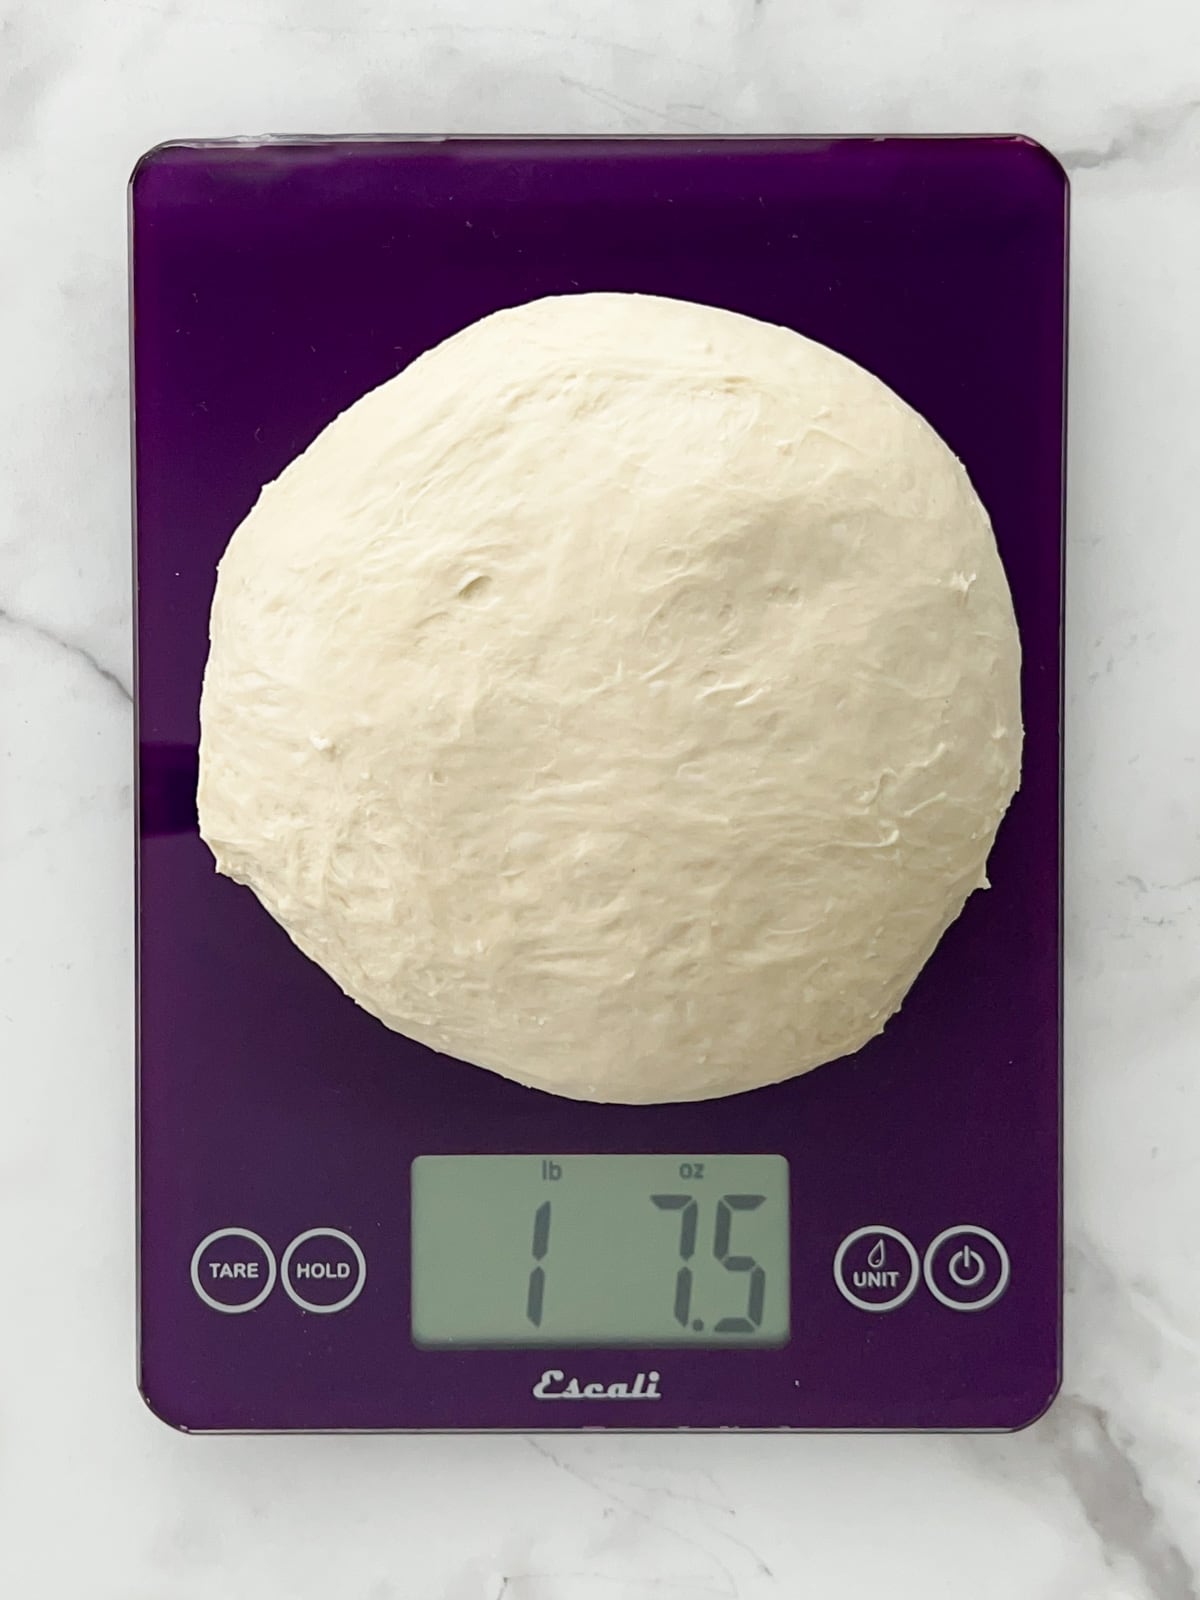 Bread dough being weighed on a purple kitchen scale.